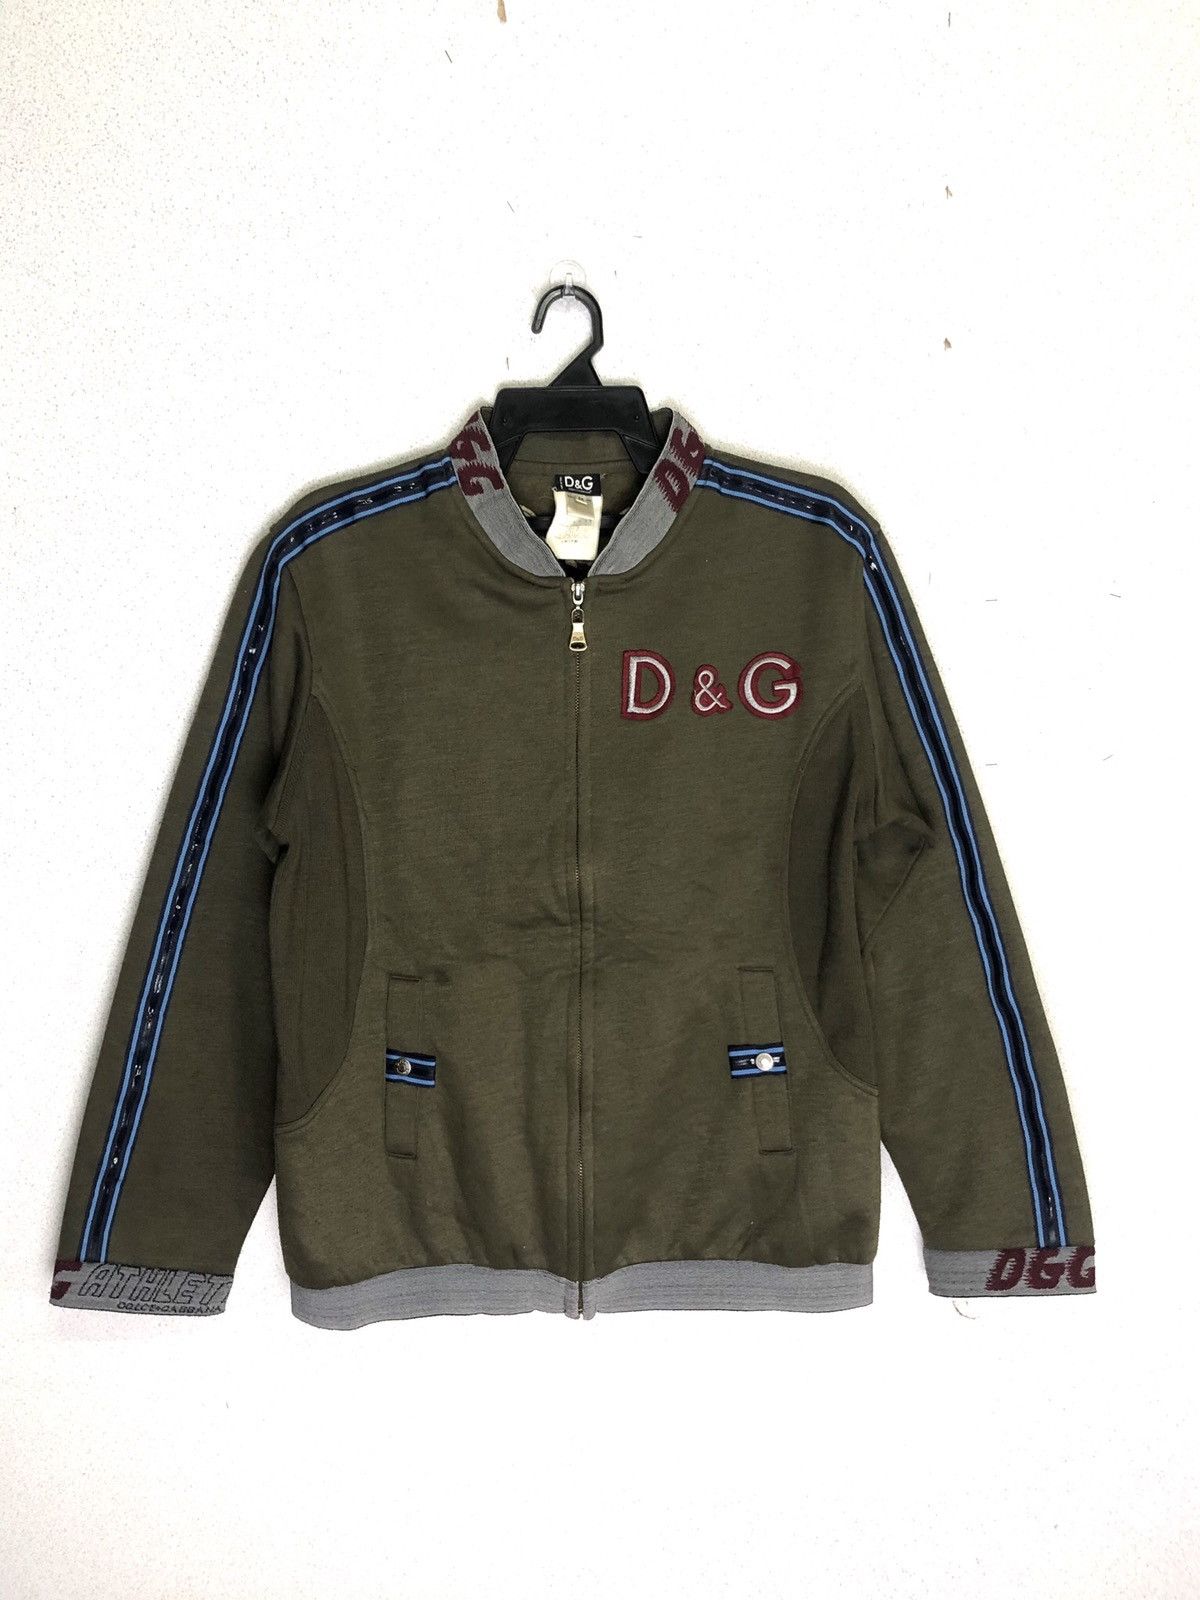 Dolce & Gabbana D&G zipper jacket with Embroidery big spellout 